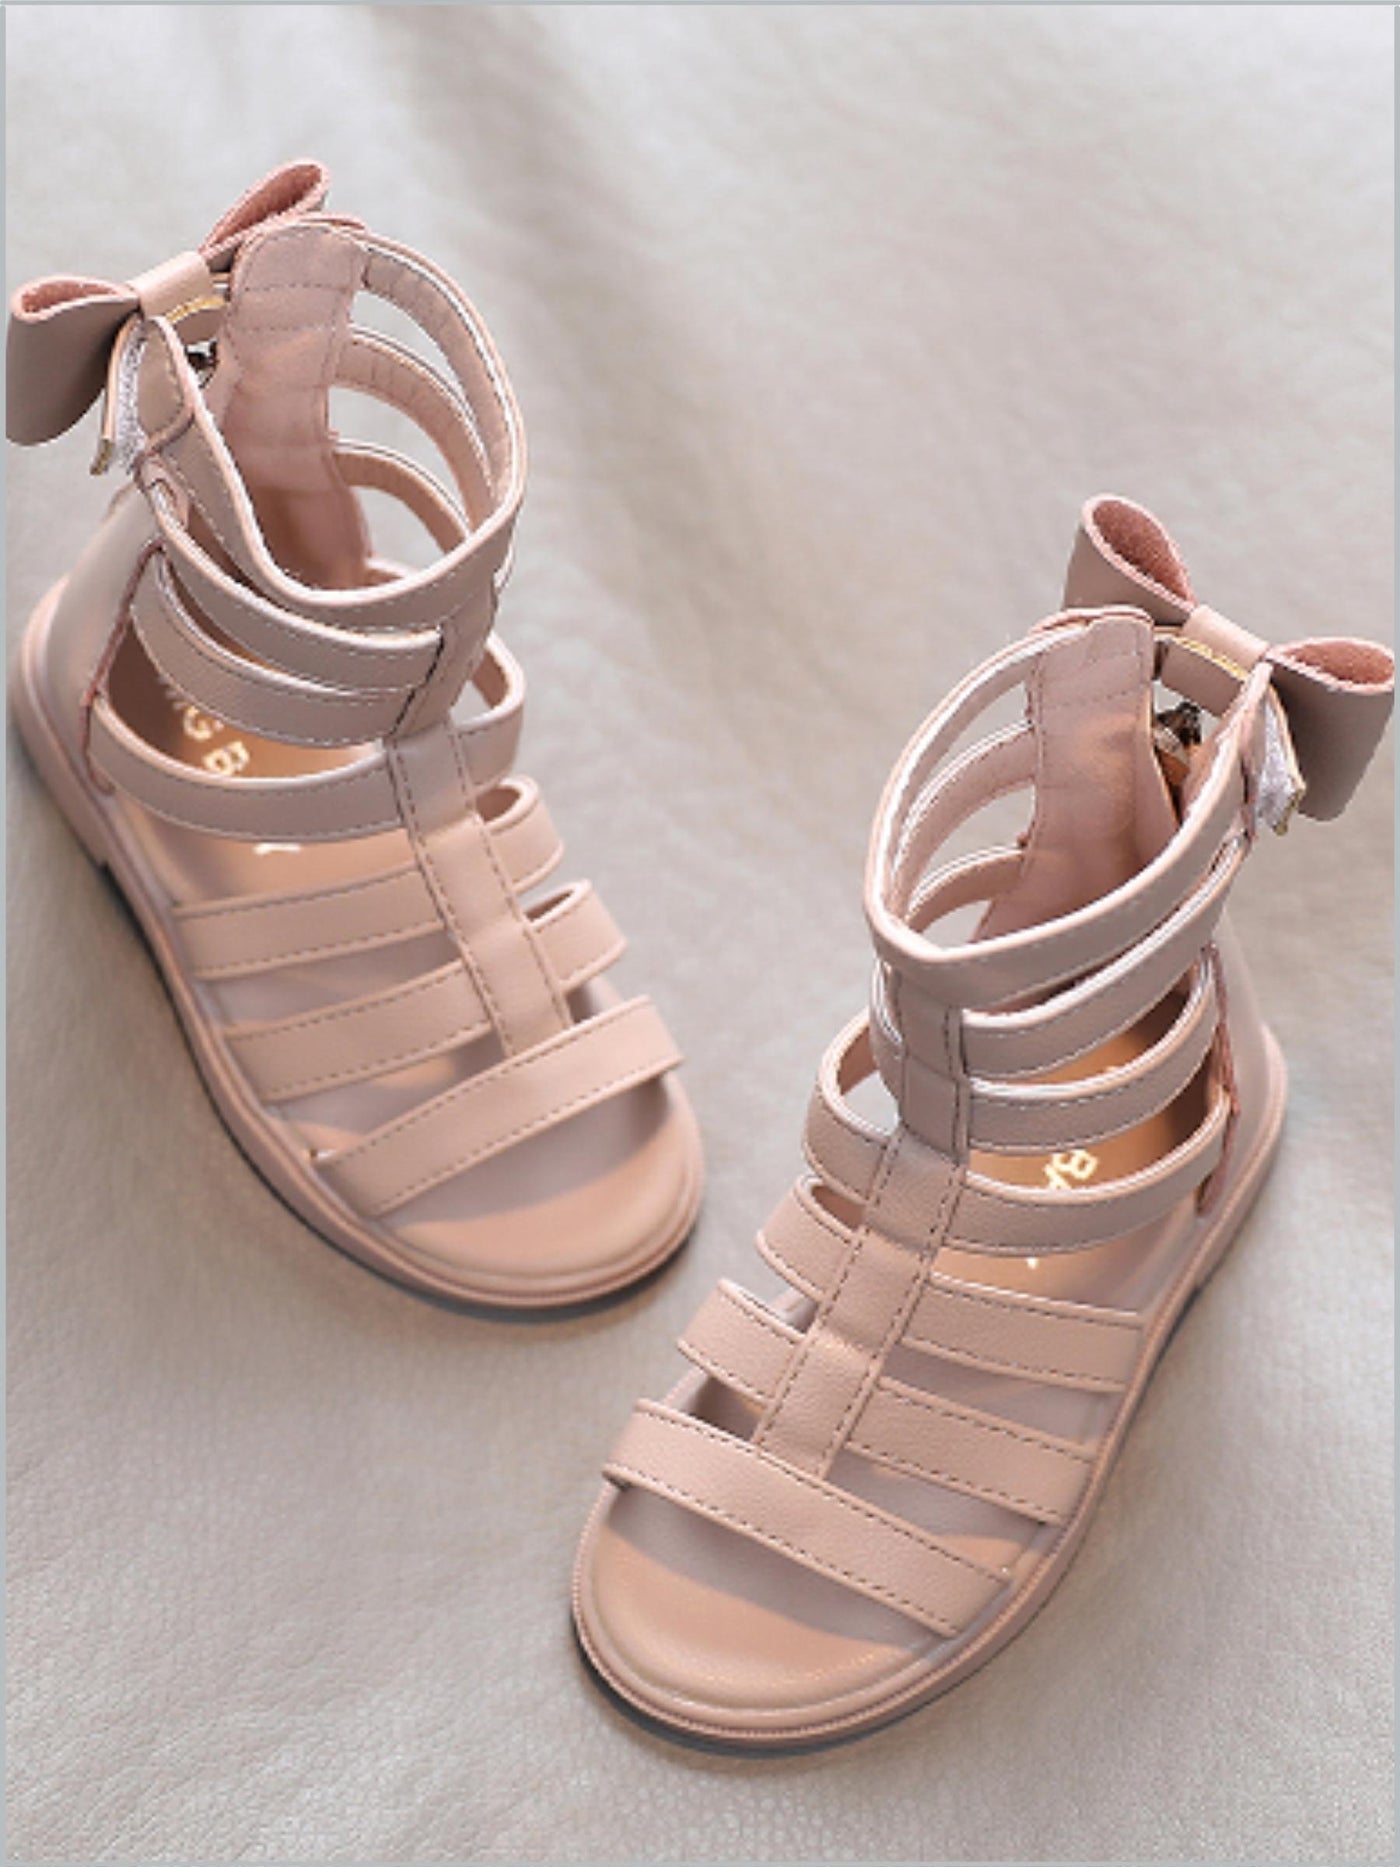 Girls Cute Bow Gladiator Boot Sandals By Liv and Mia